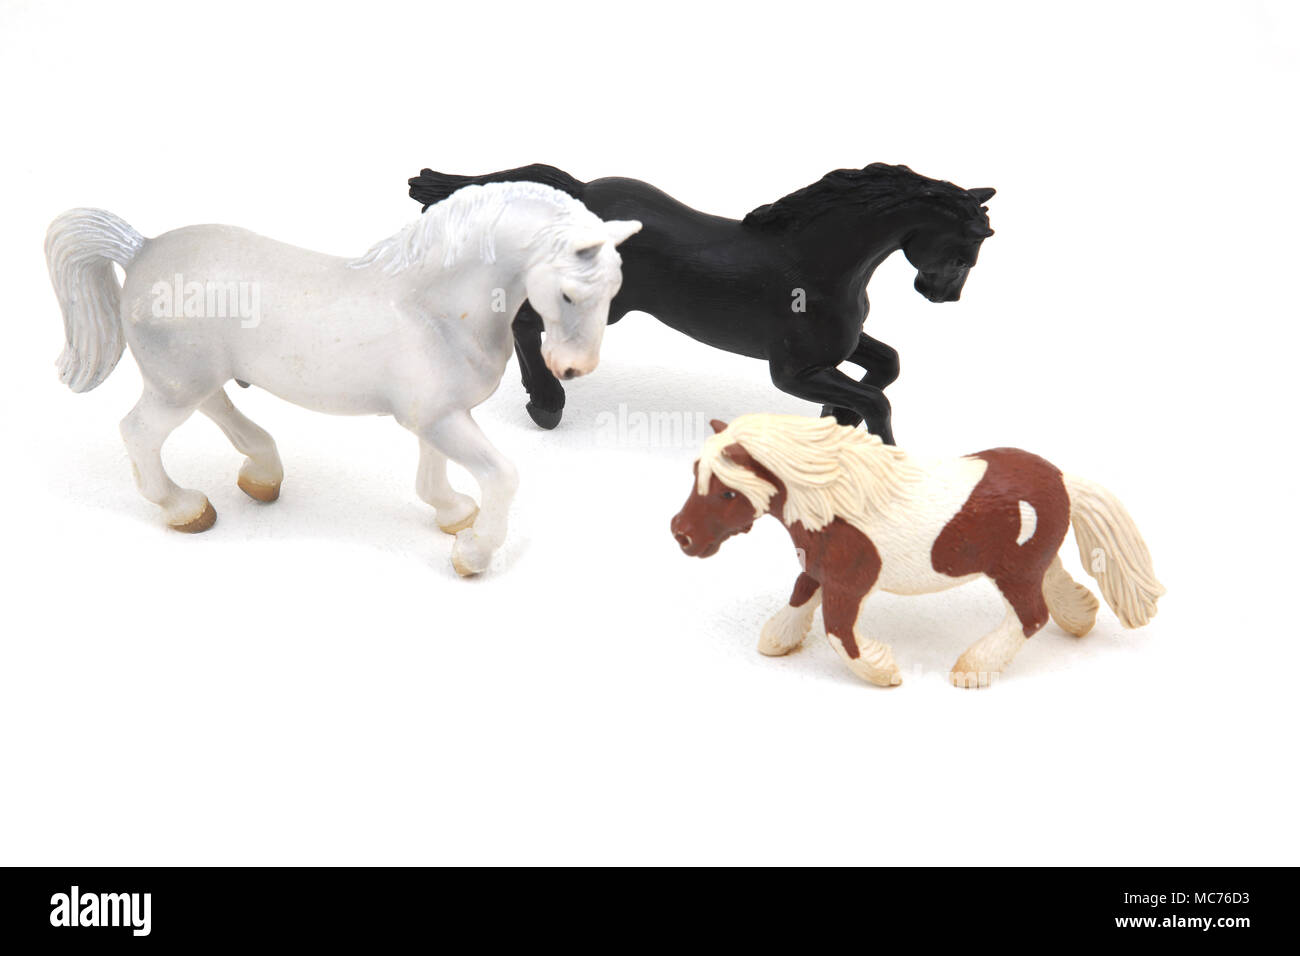 Schleich High Resolution Stock Photography and Images - Alamy